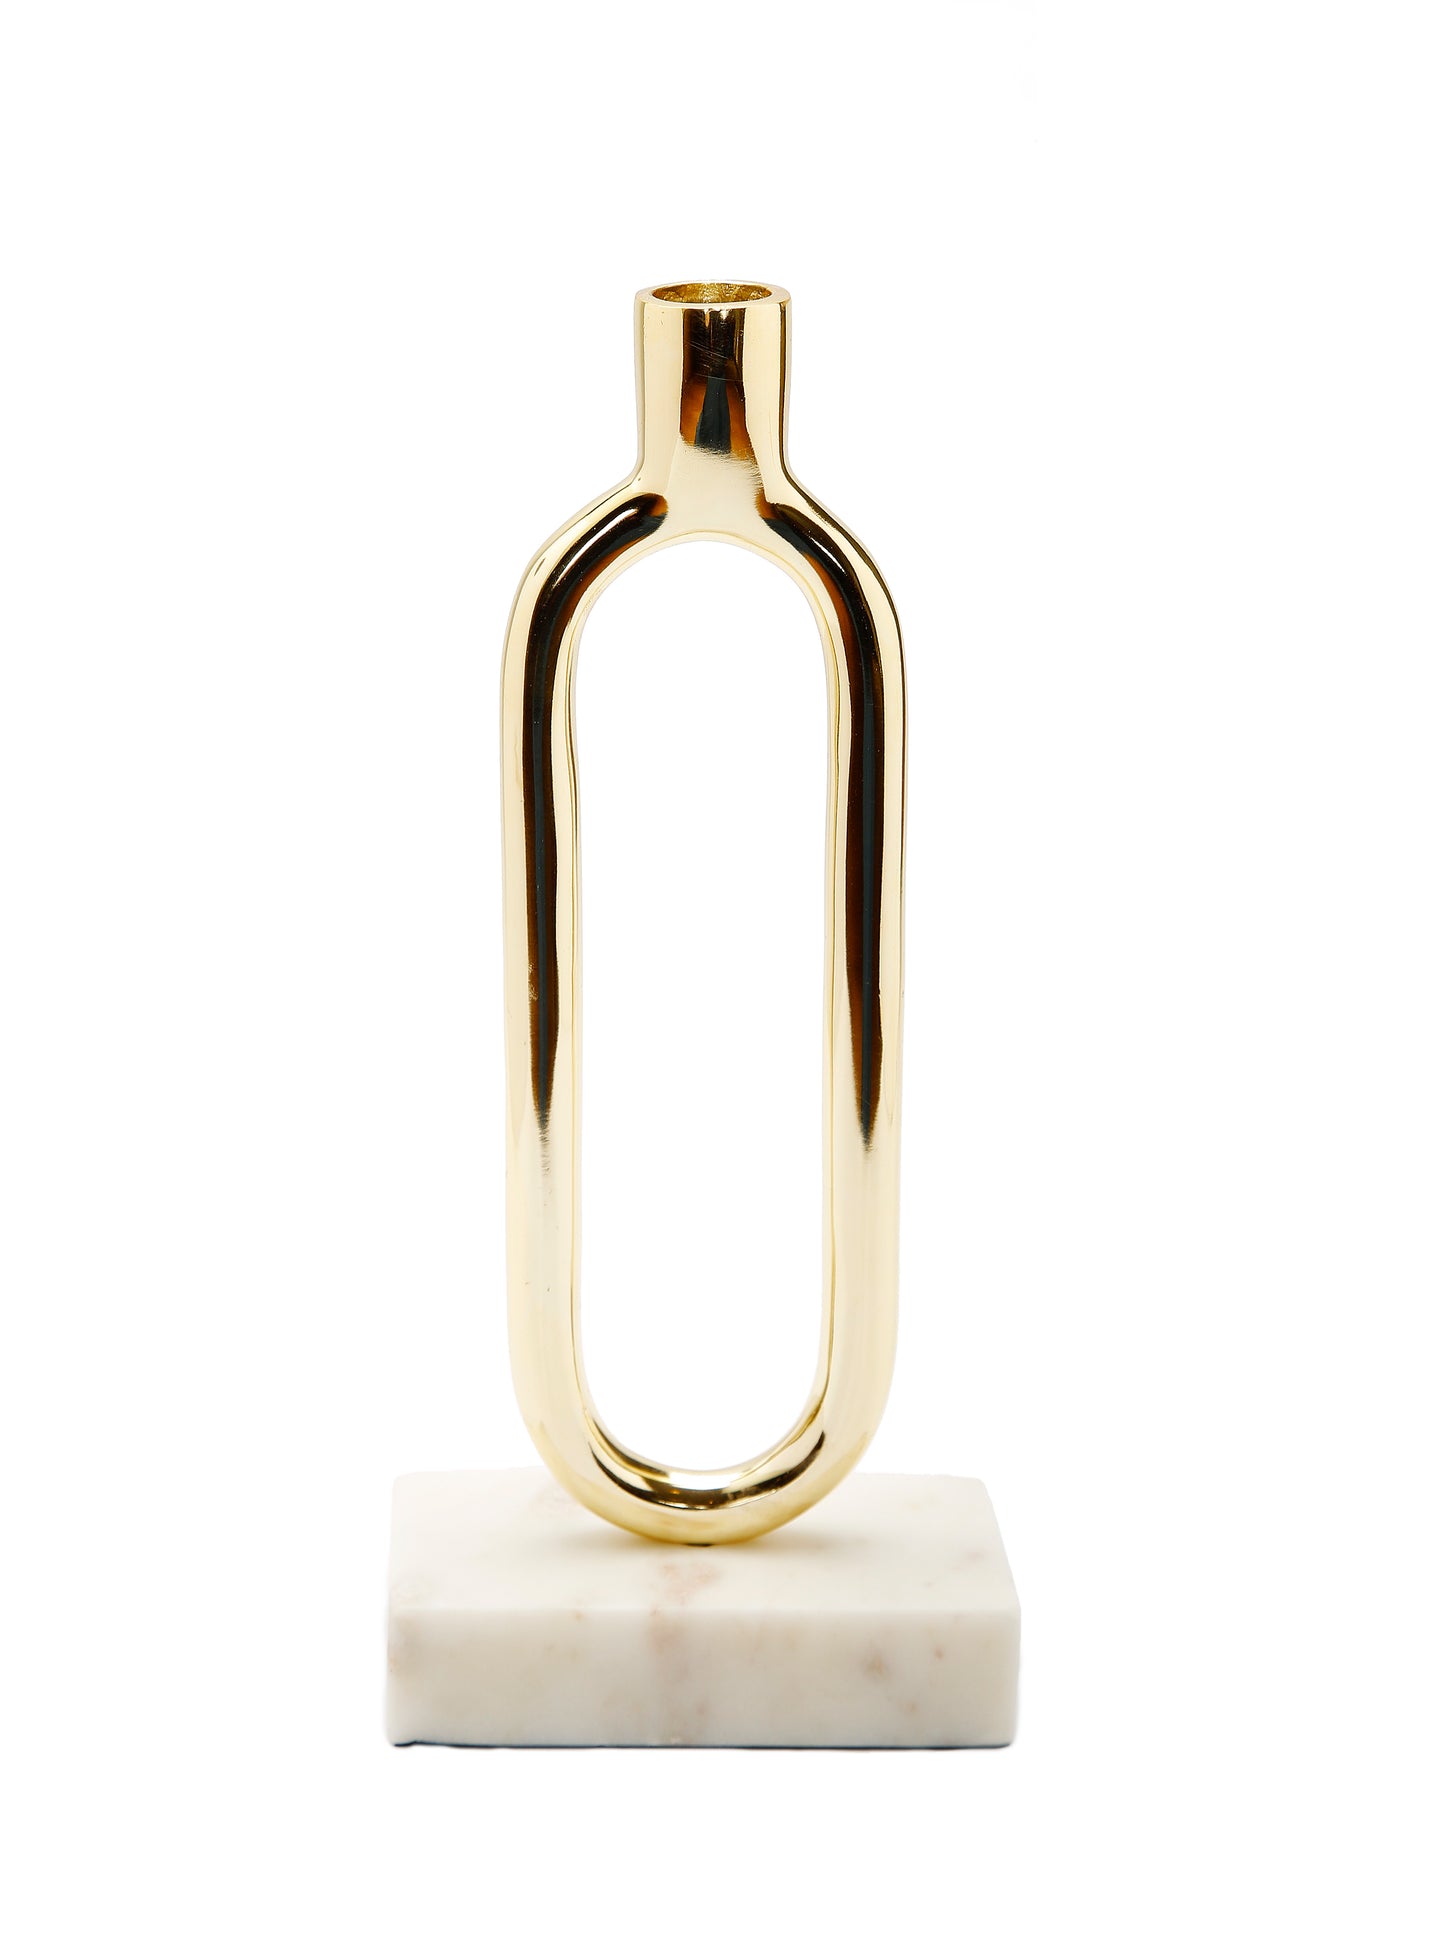 Gold Loop Taper Candle Holder on Marble Base - 11.75